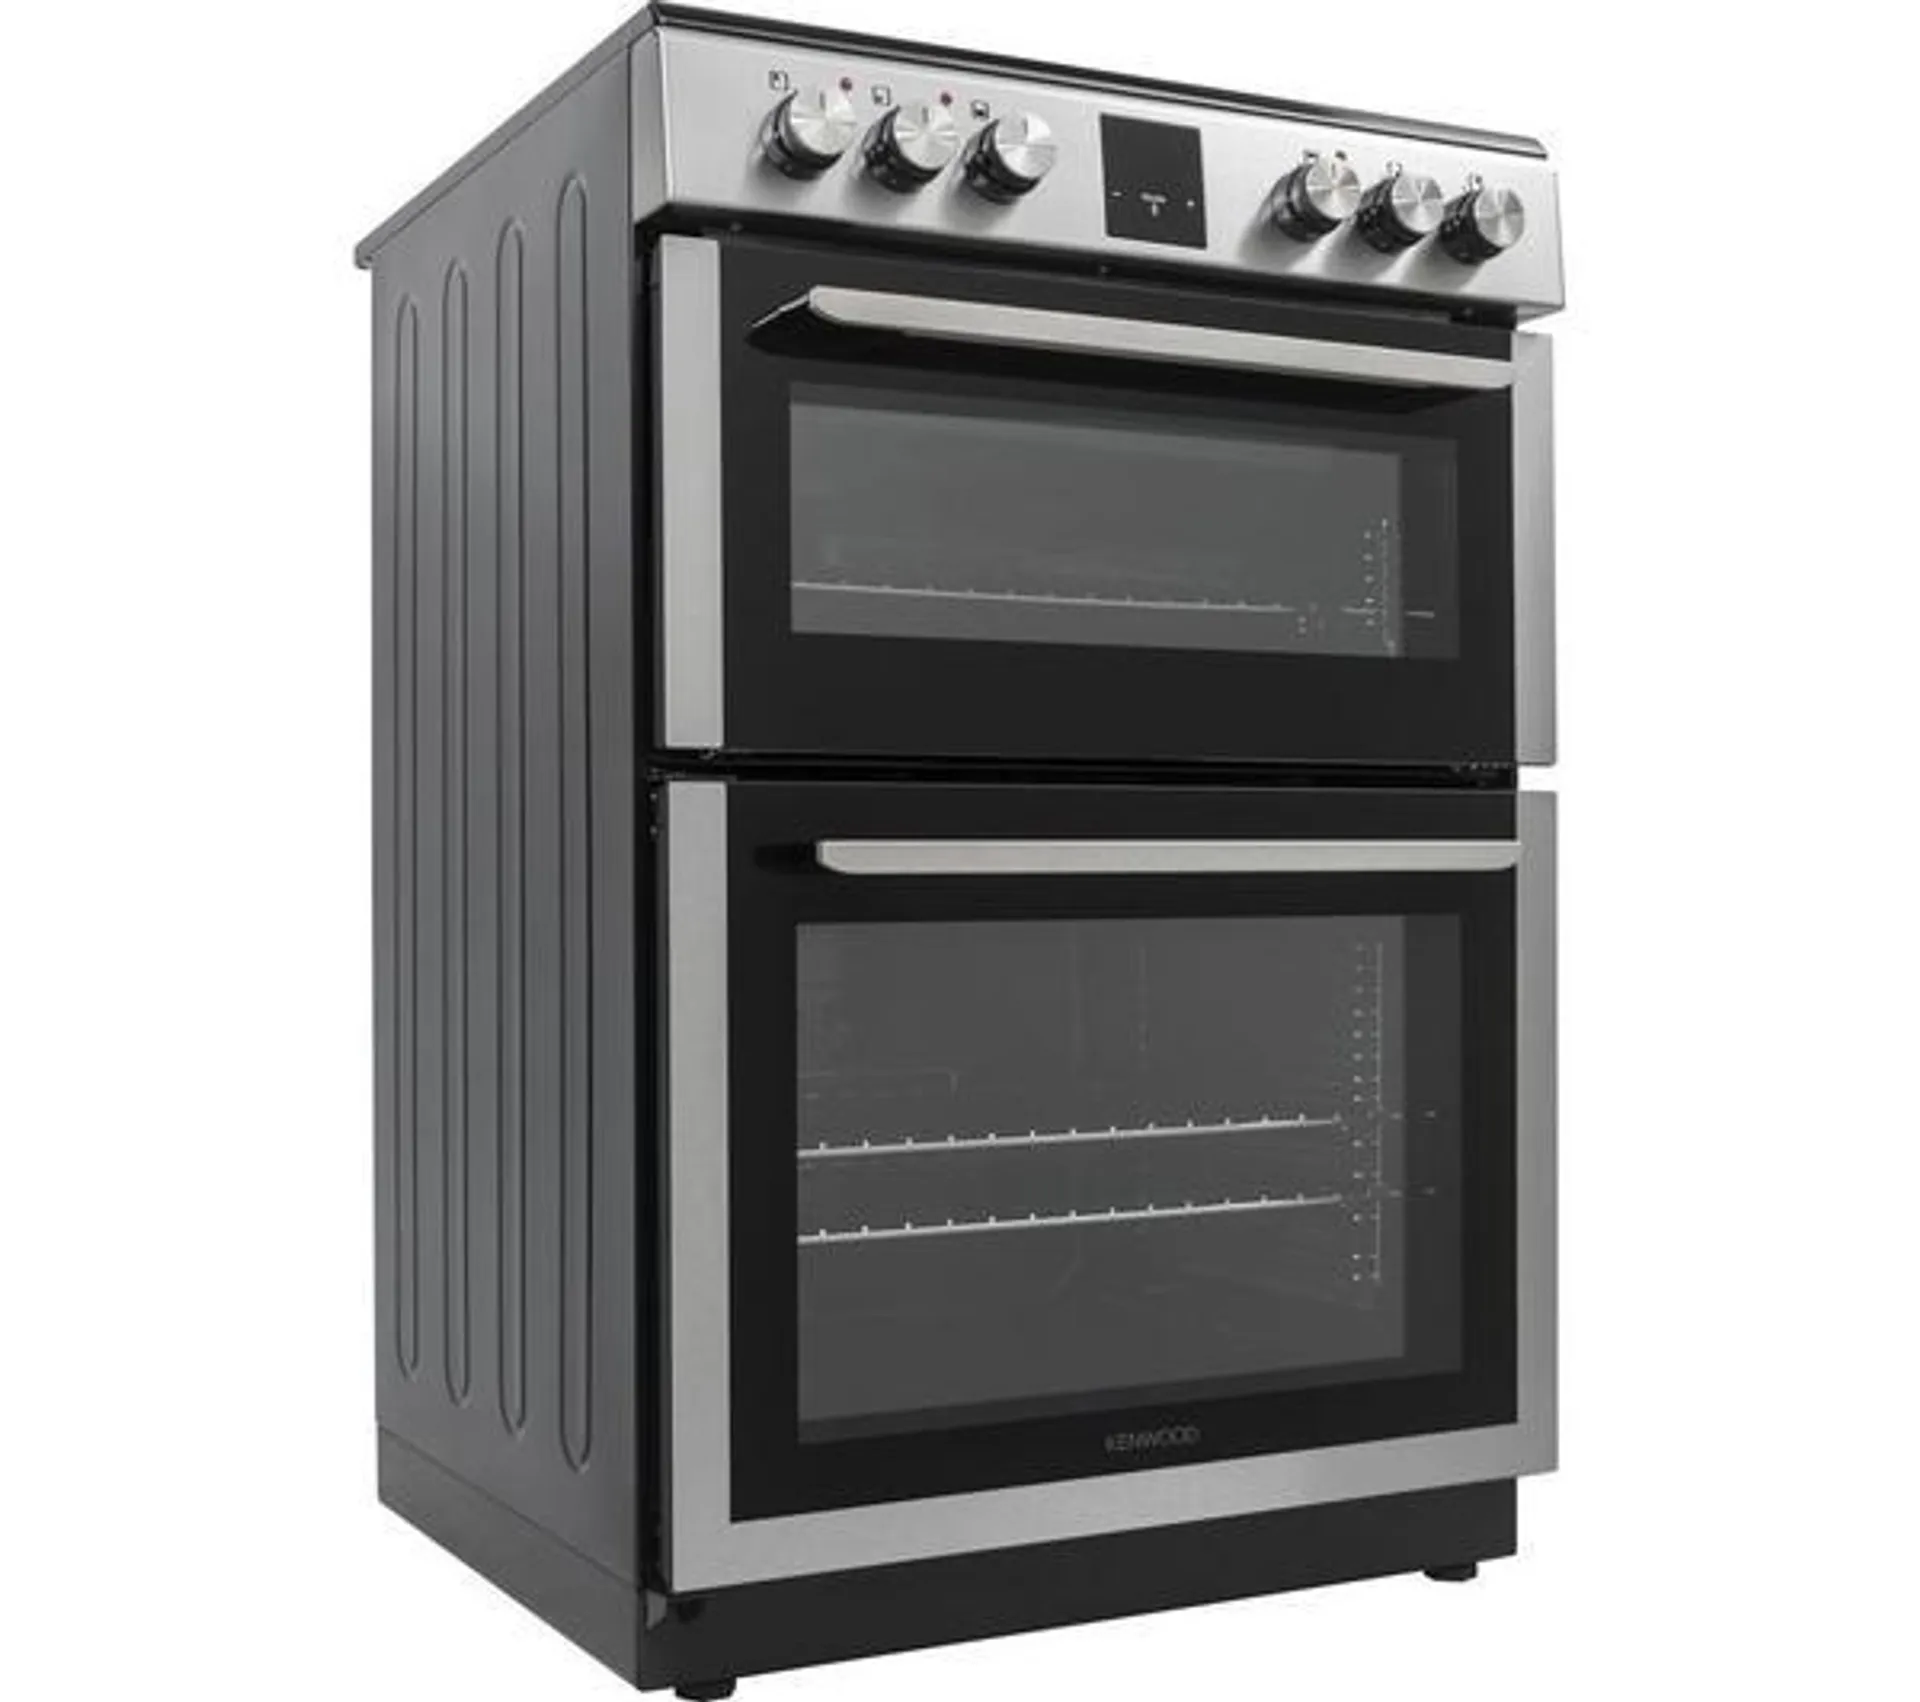 KENWOOD KDC66SS22 60 cm Electric Ceramic Cooker - Silver